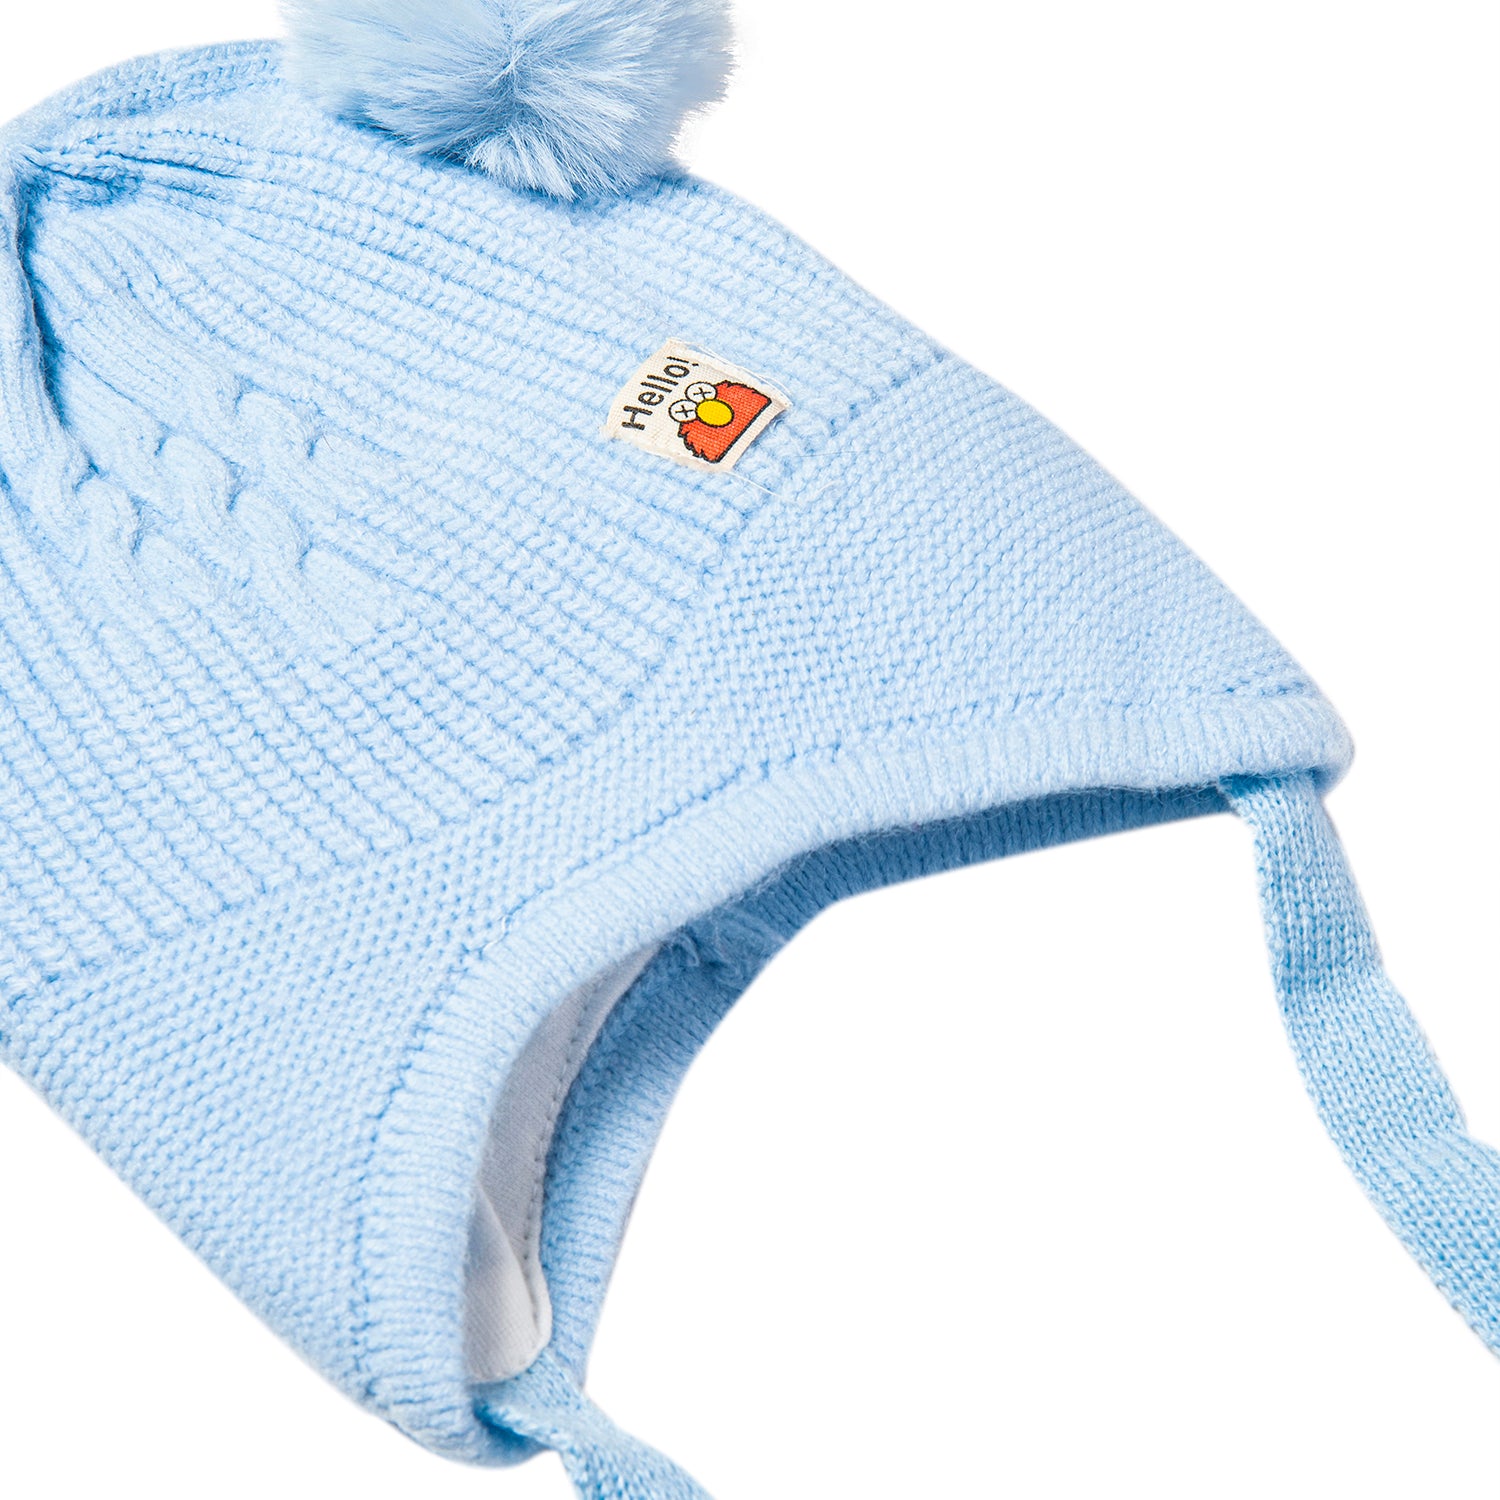 Baby Moo Knit Woollen Cap With Tie Knot For Ear Protection Solid Blue